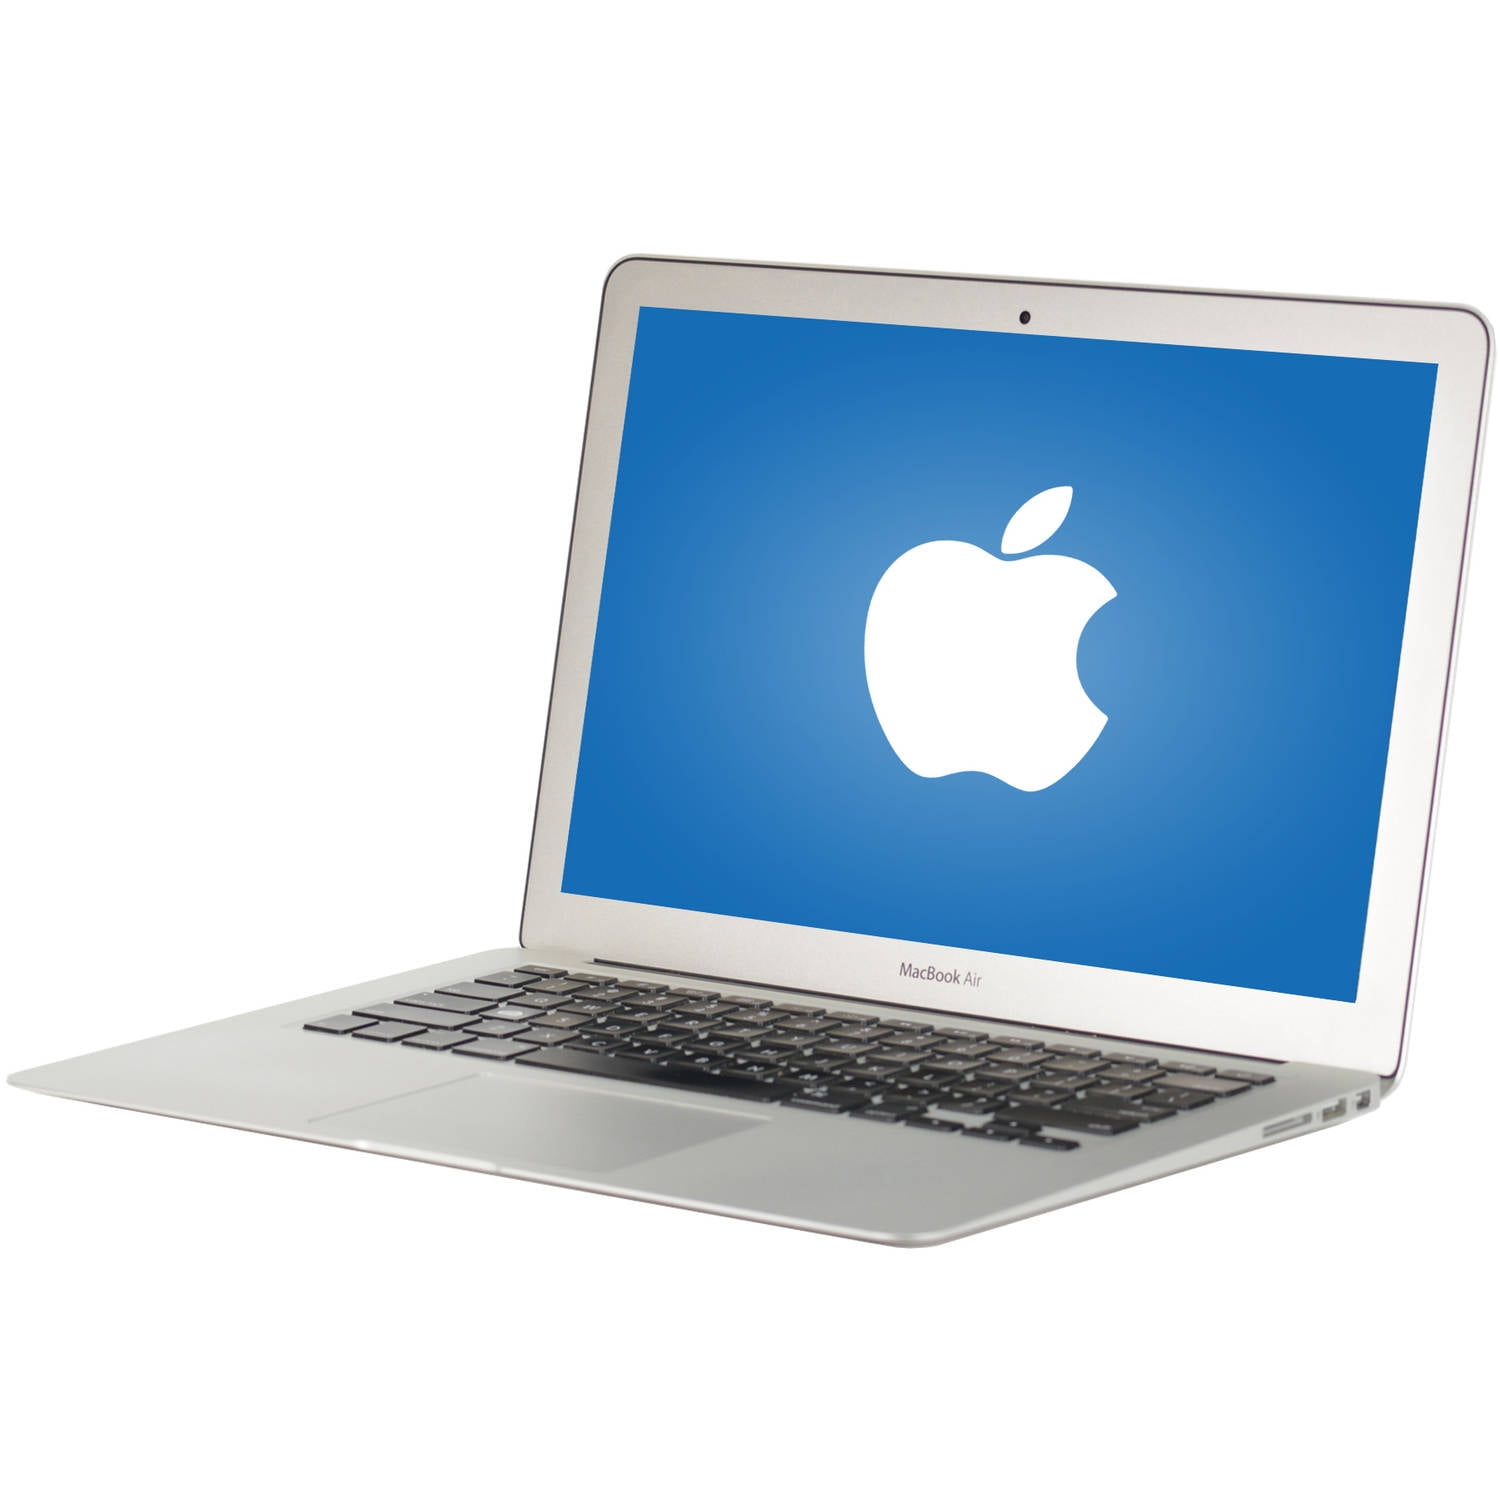 Apple Mac Air Solid State Drive